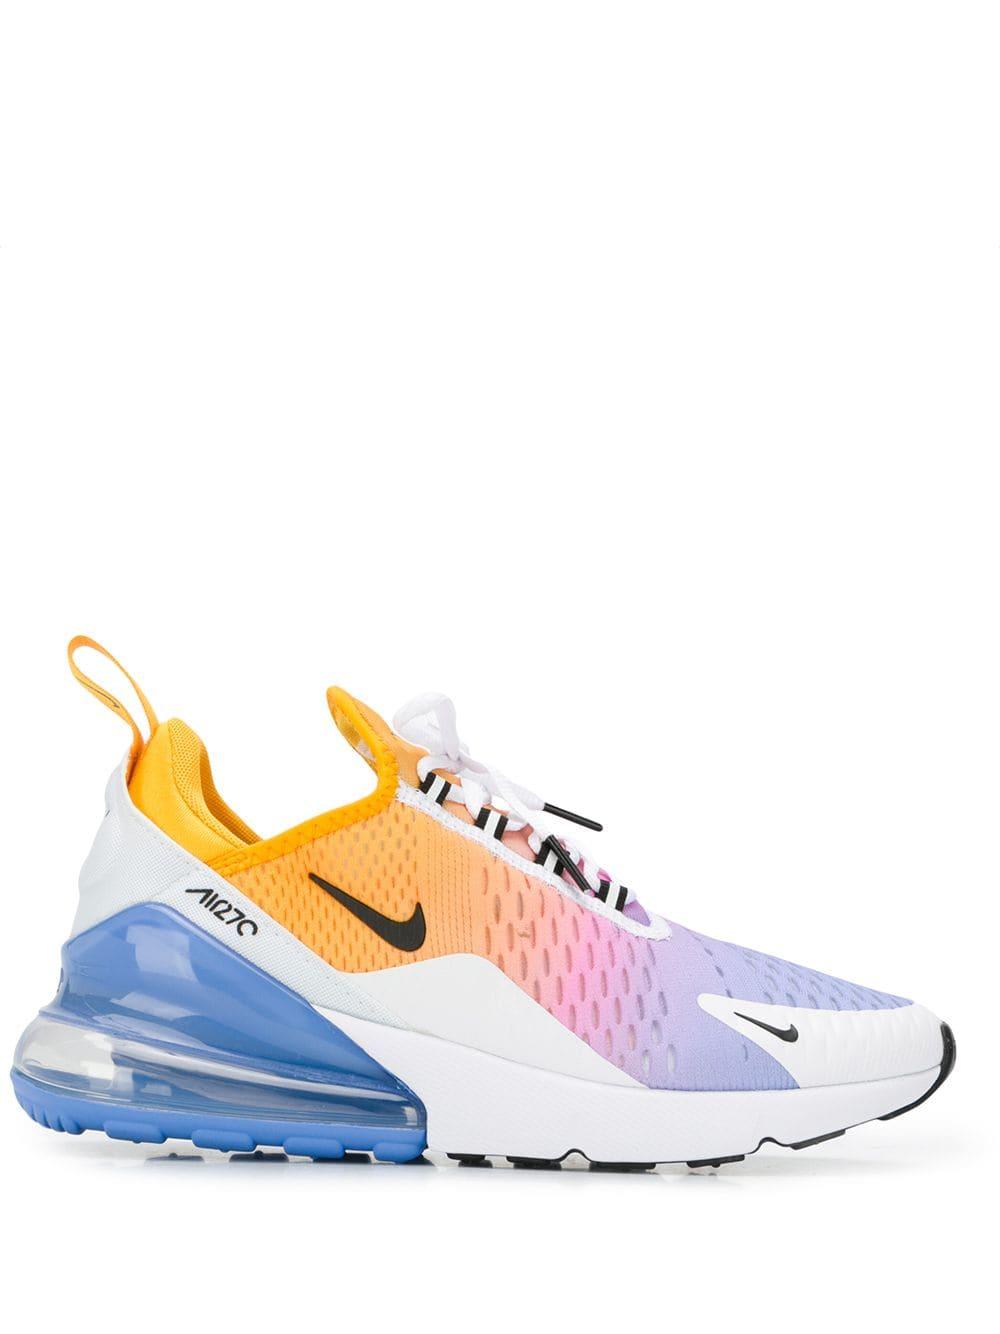 white and yellow air max 270